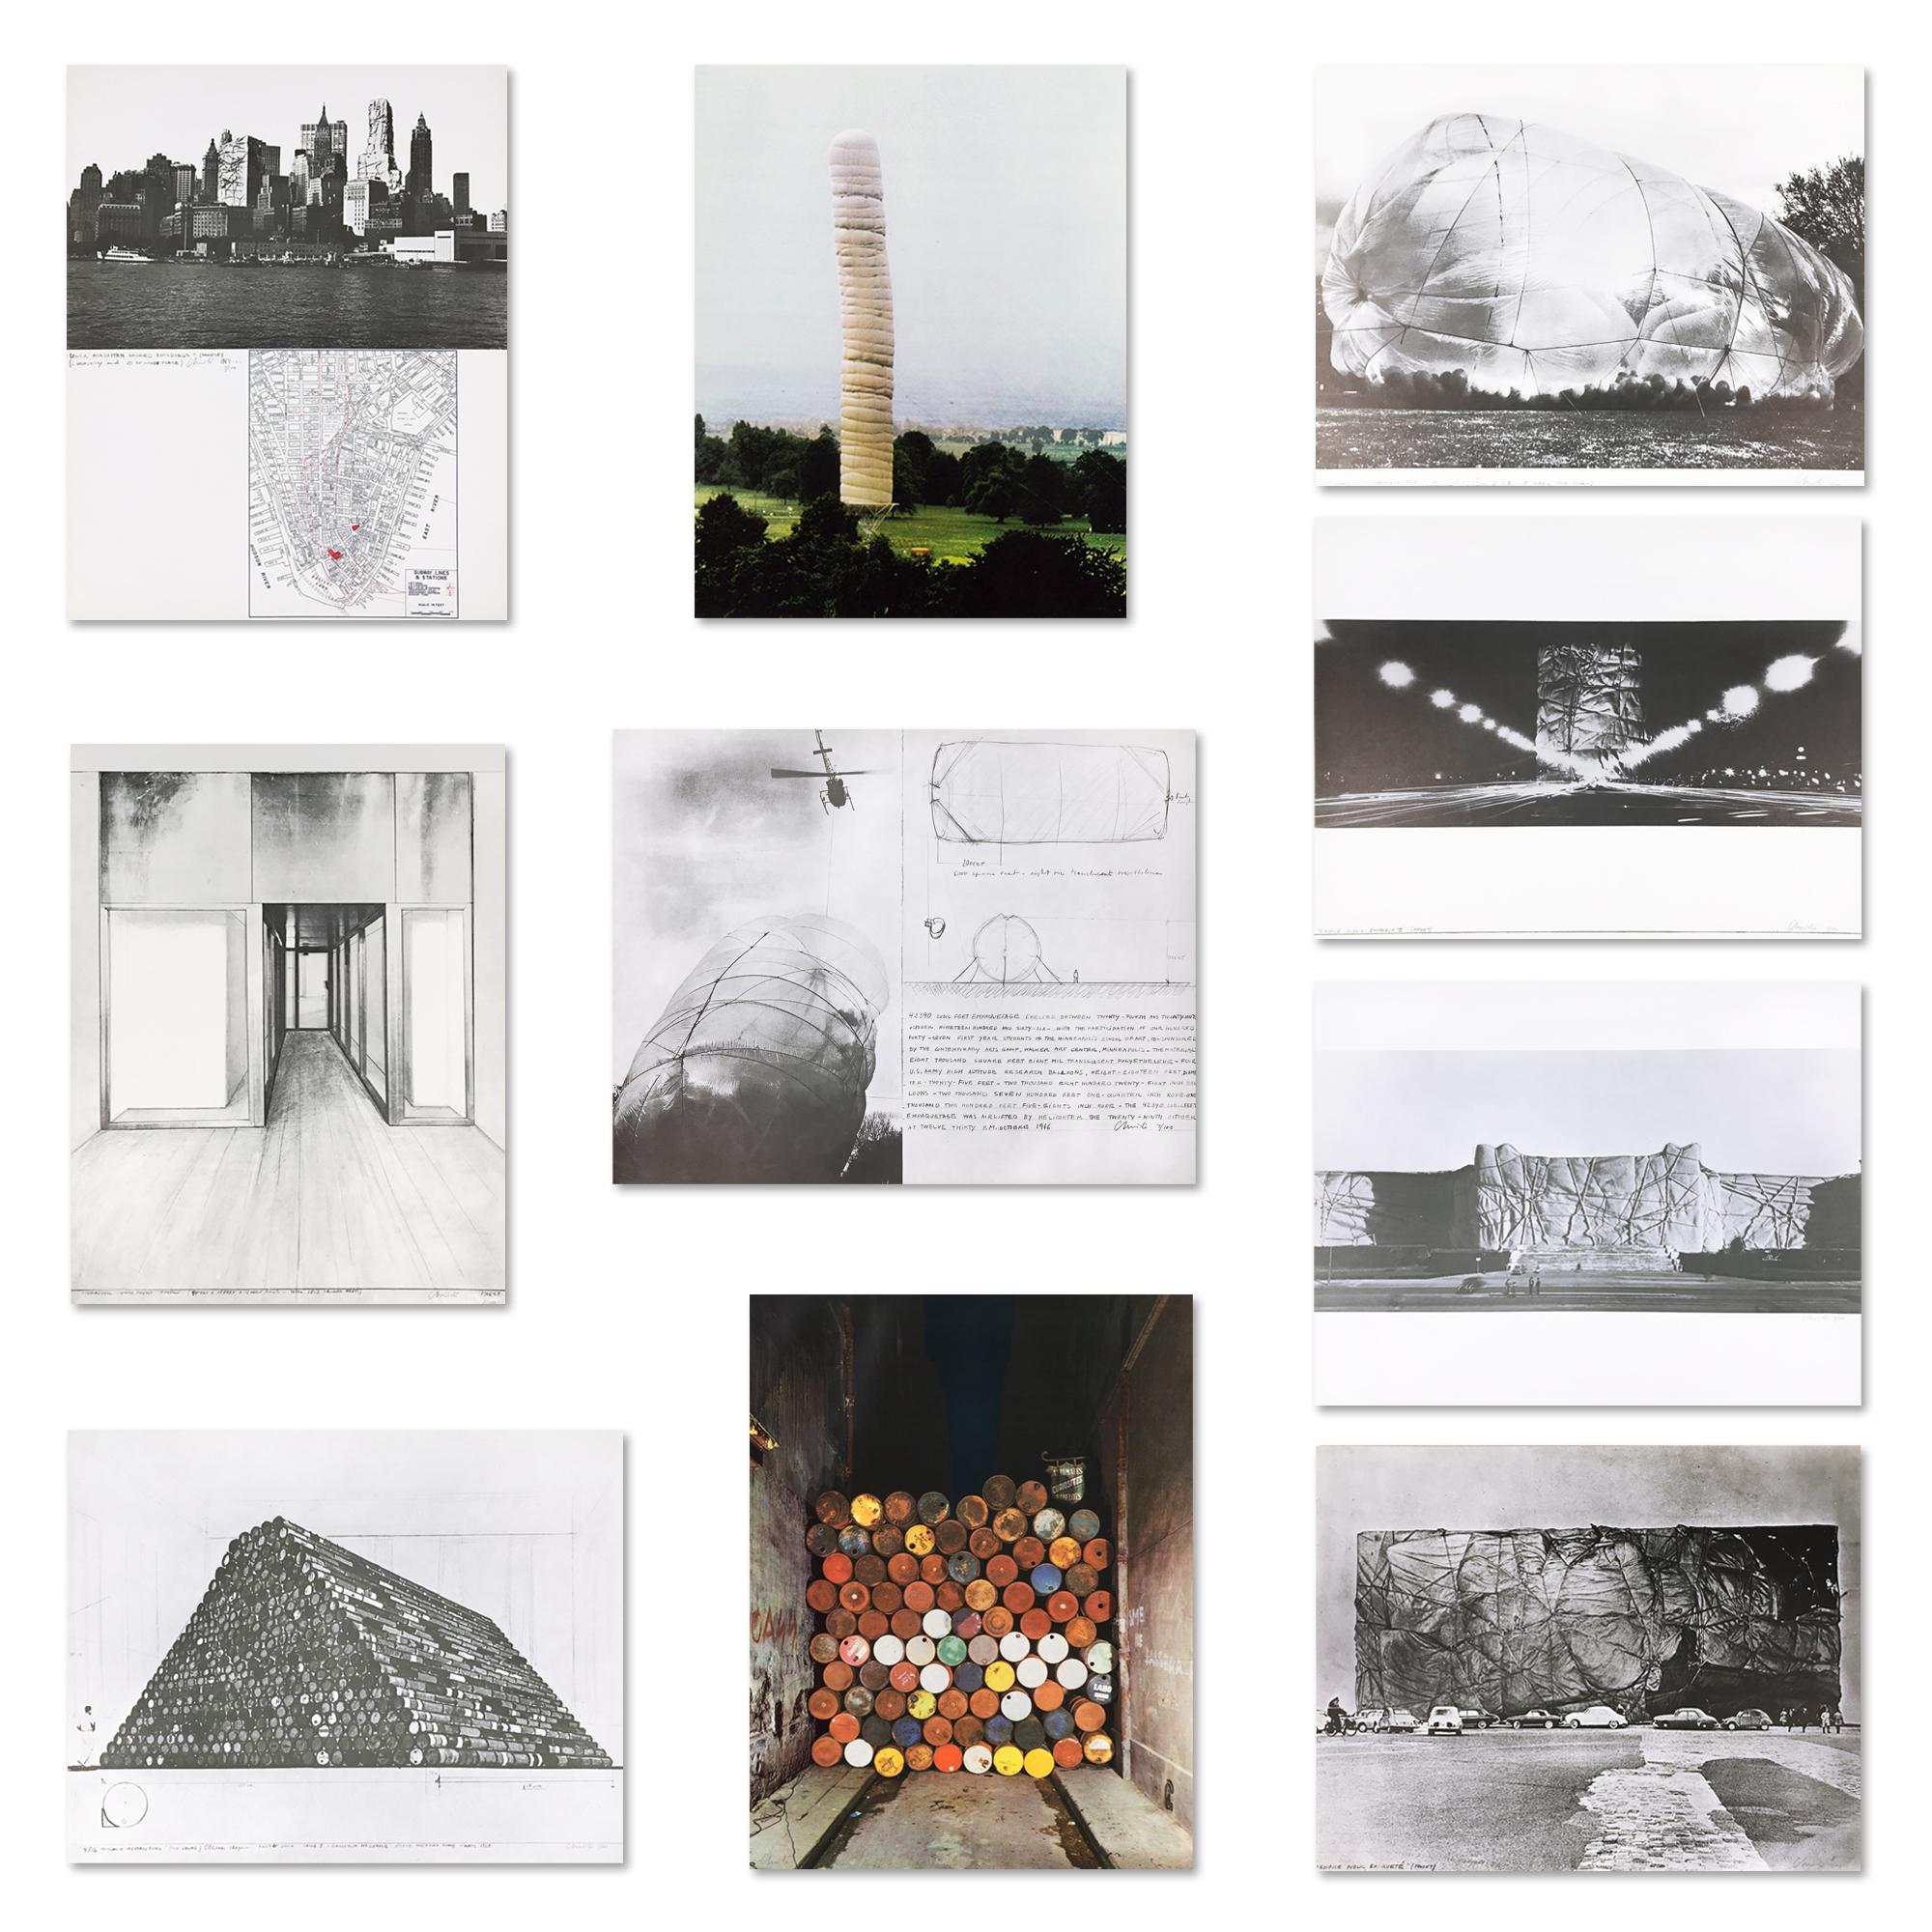 Christo and Jeanne-Claude Figurative Print - Monuments, Portfolio with 10 Prints and Sculpture, Documenta, Concept Art